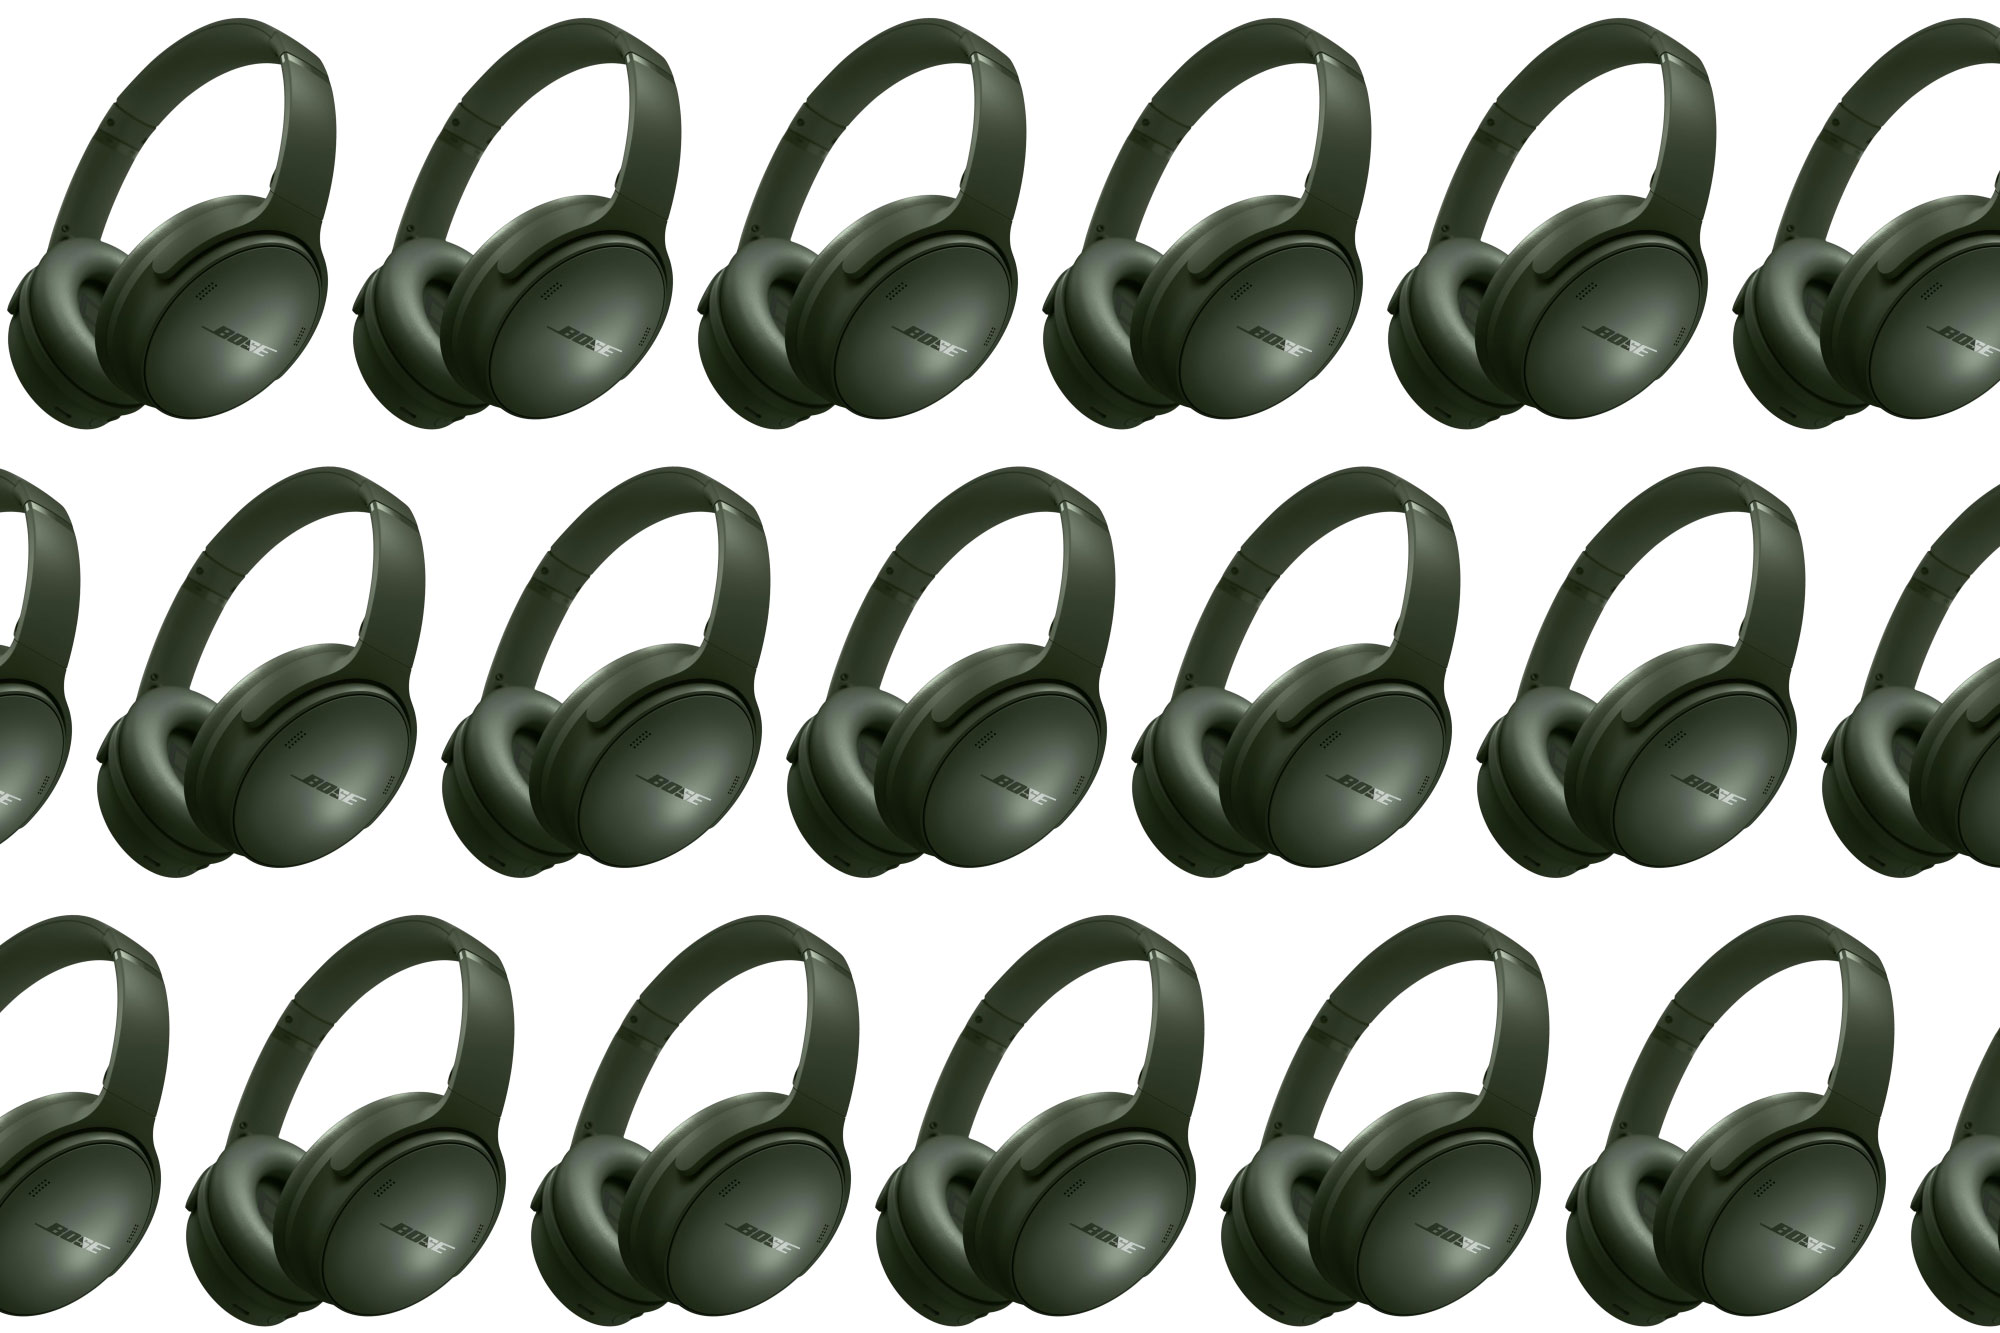 A pair of green Bose headphones arranged in a pattern on a plain background.